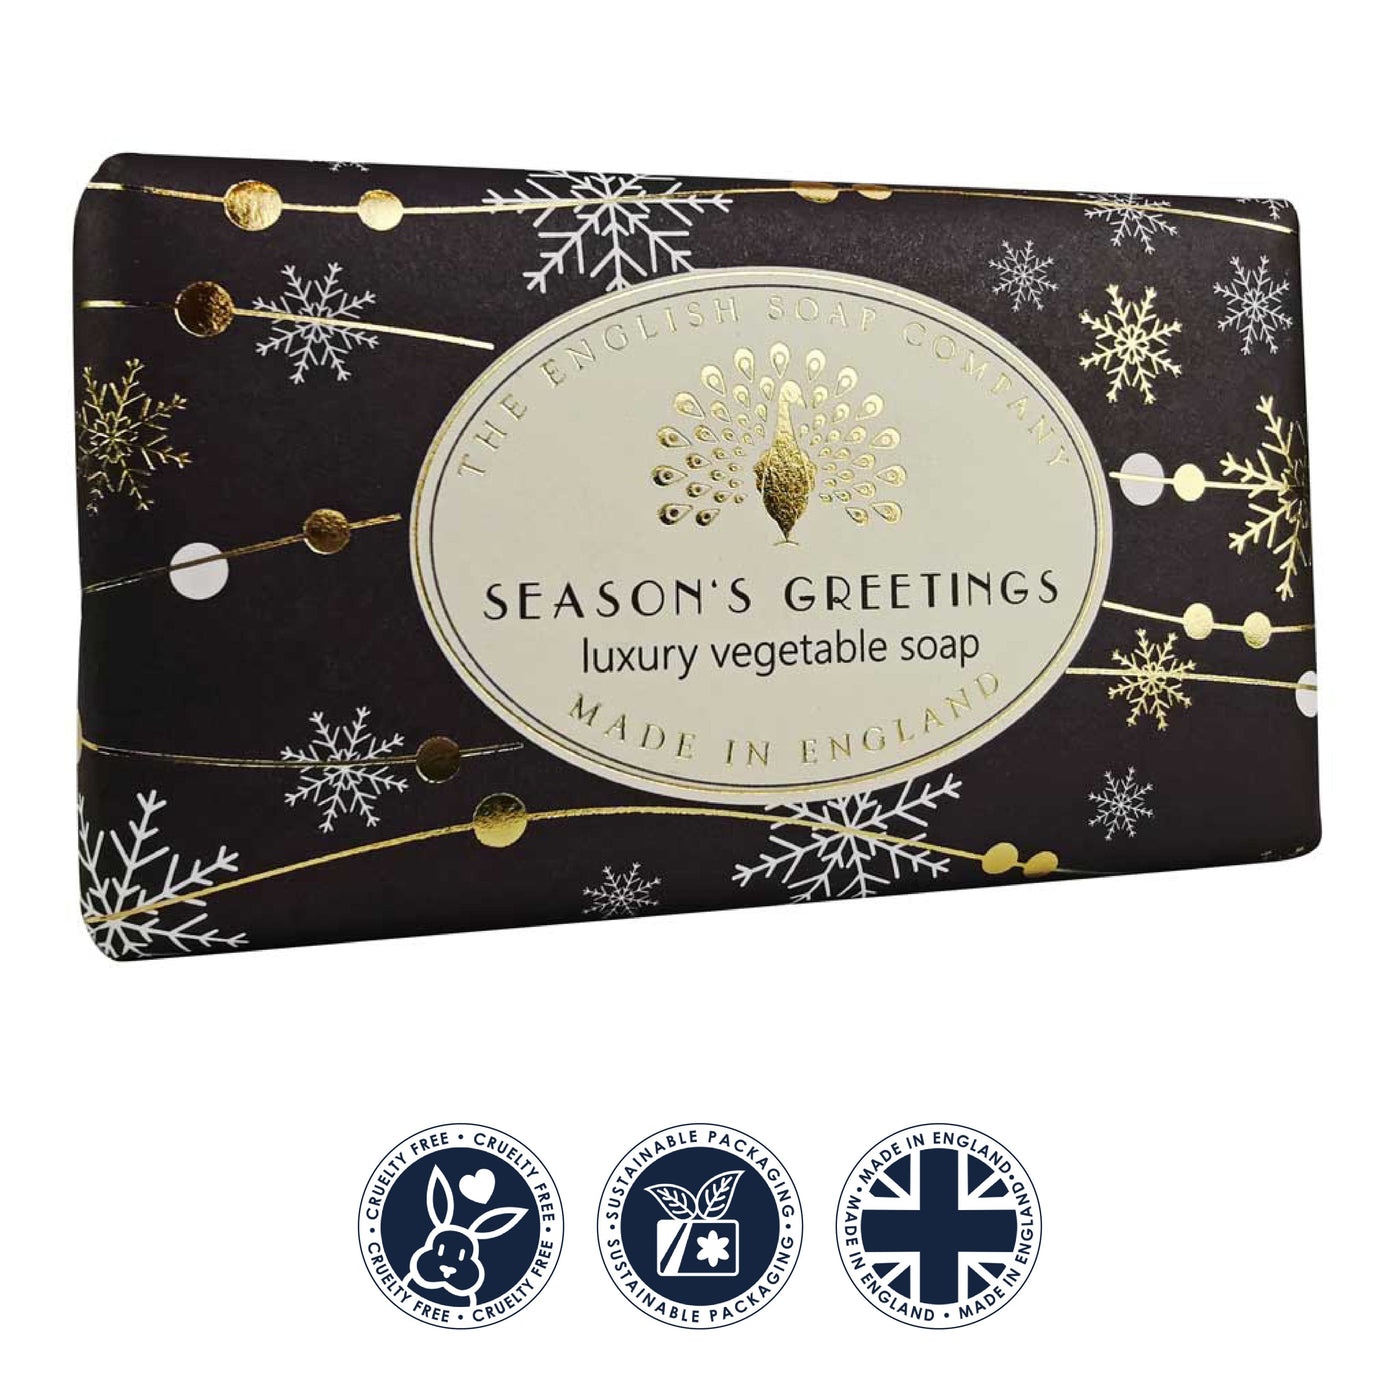 Cinnamon & Orange Seasons Greetings Christmas Soap Bar from our Luxury Bar Soap collection by The English Soap Company